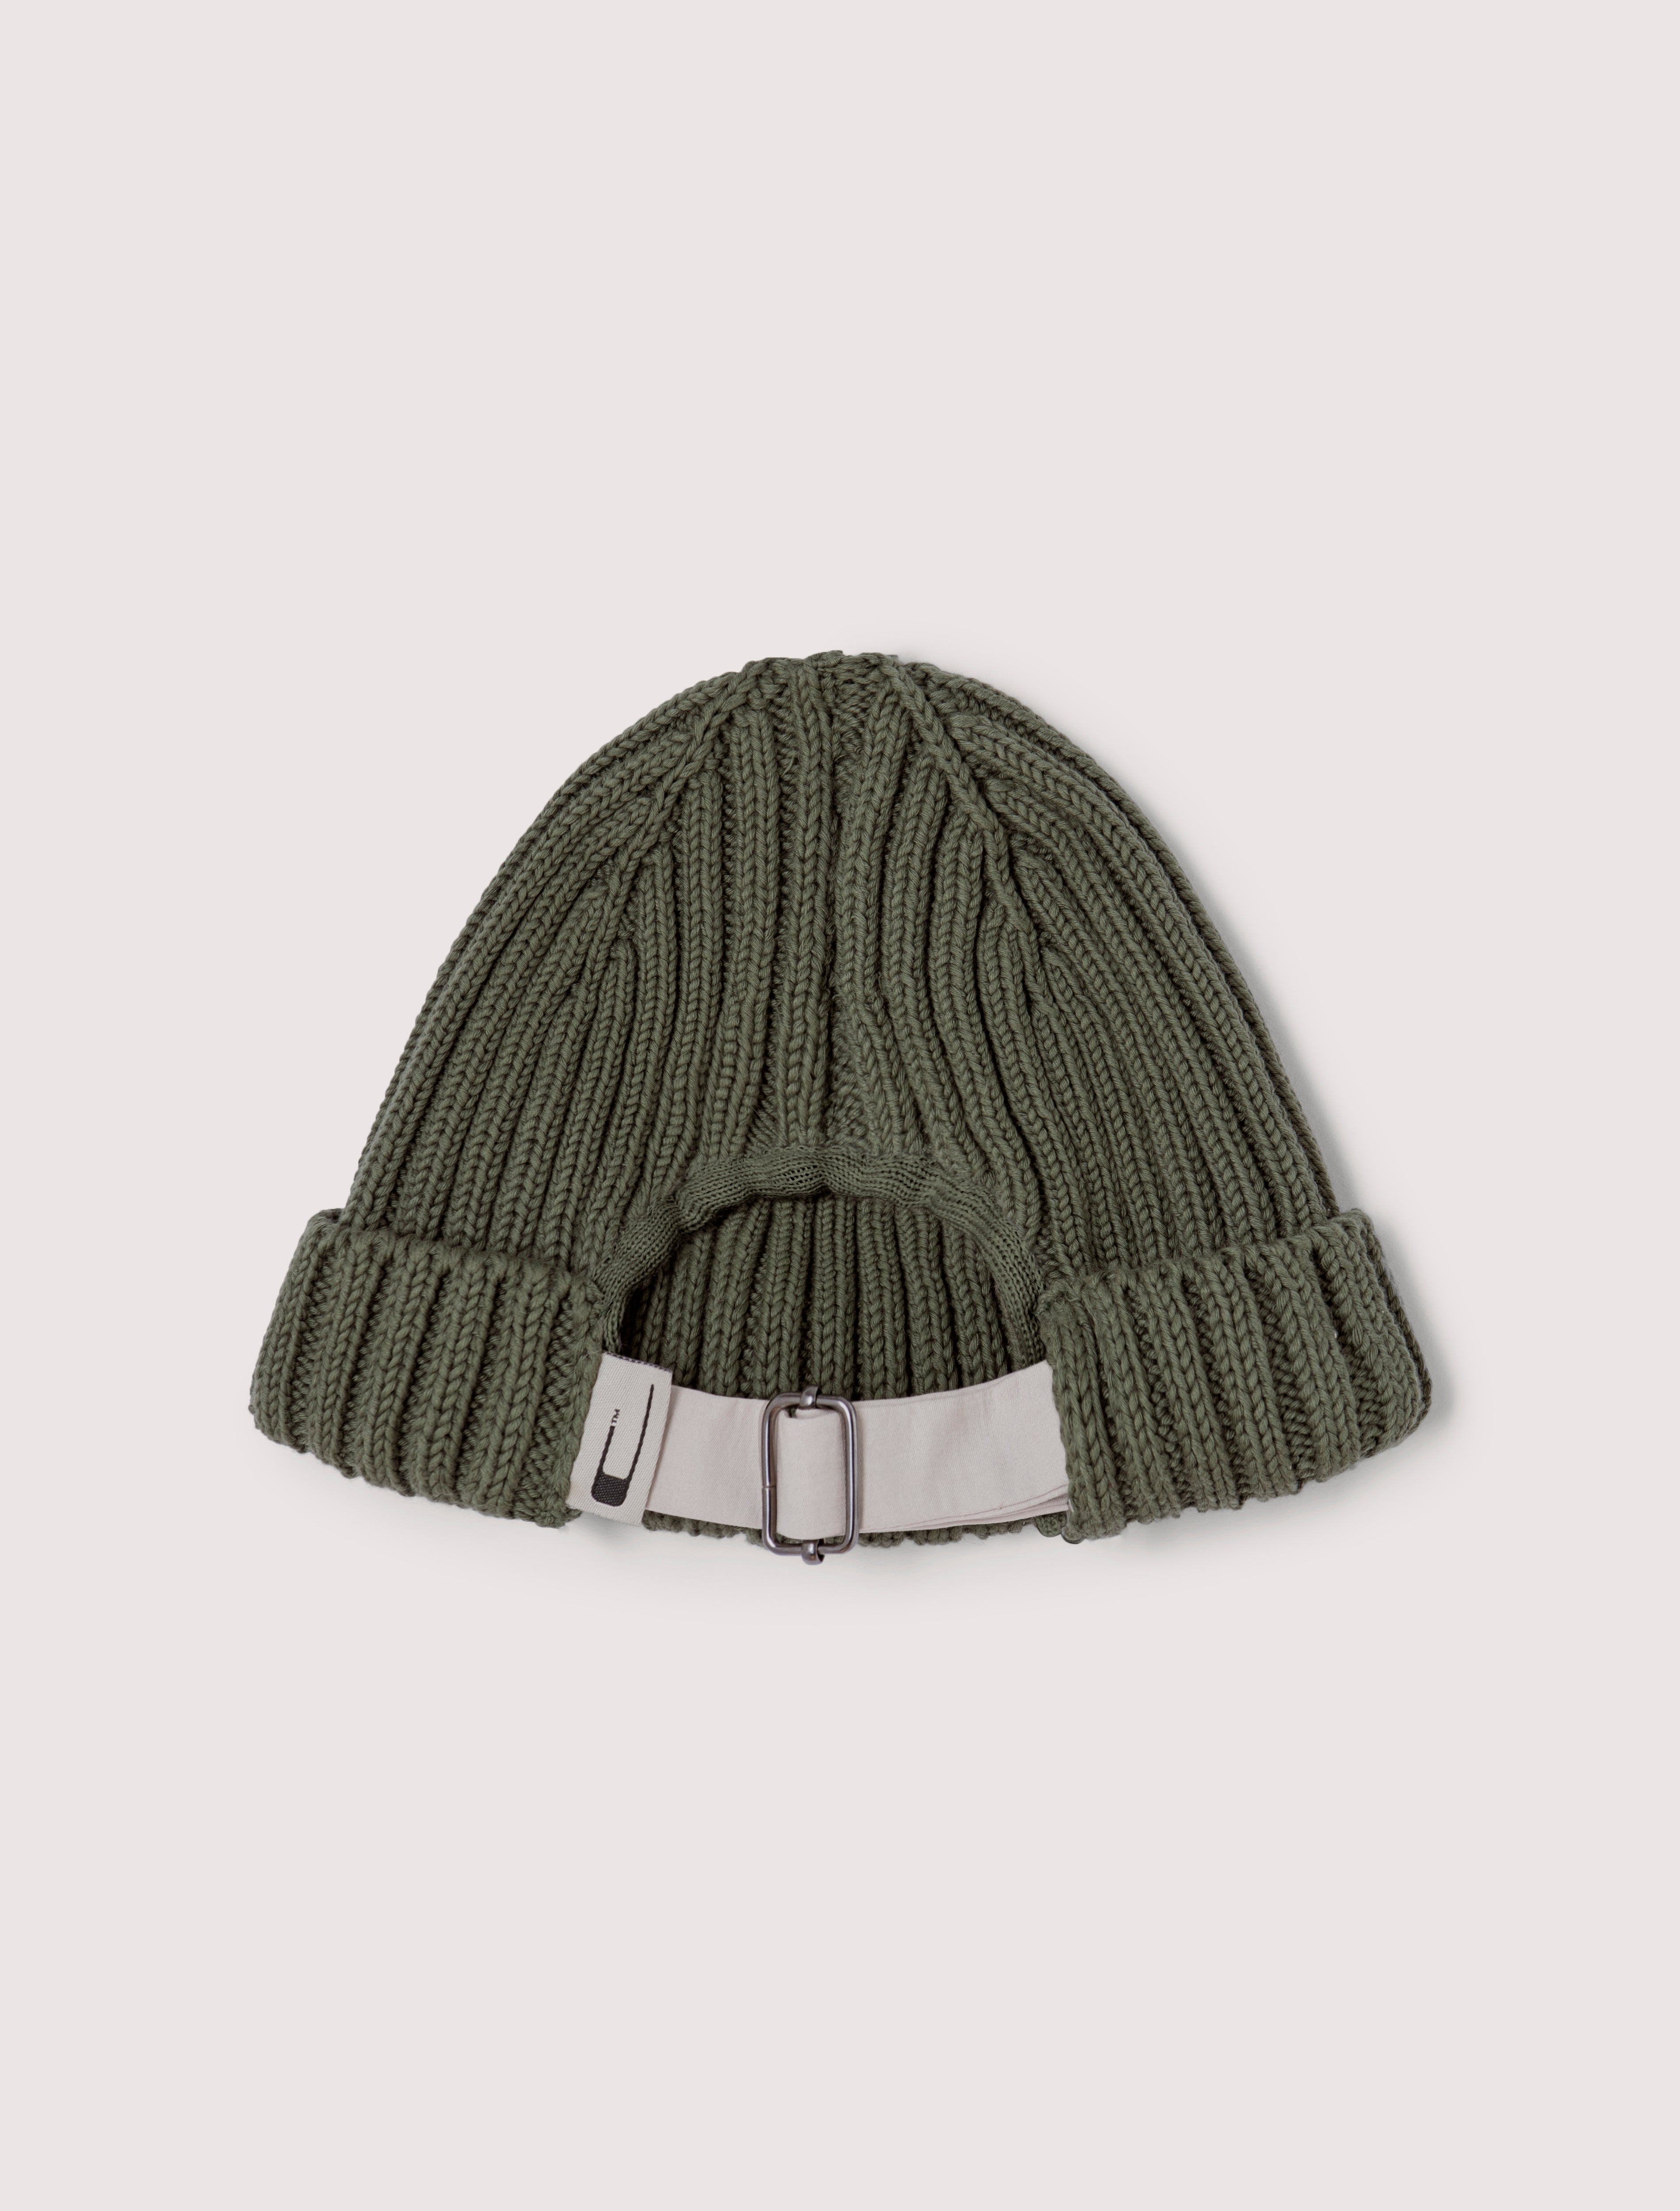 CARRER_ORIA KNITTED BEANIE IN GREEN